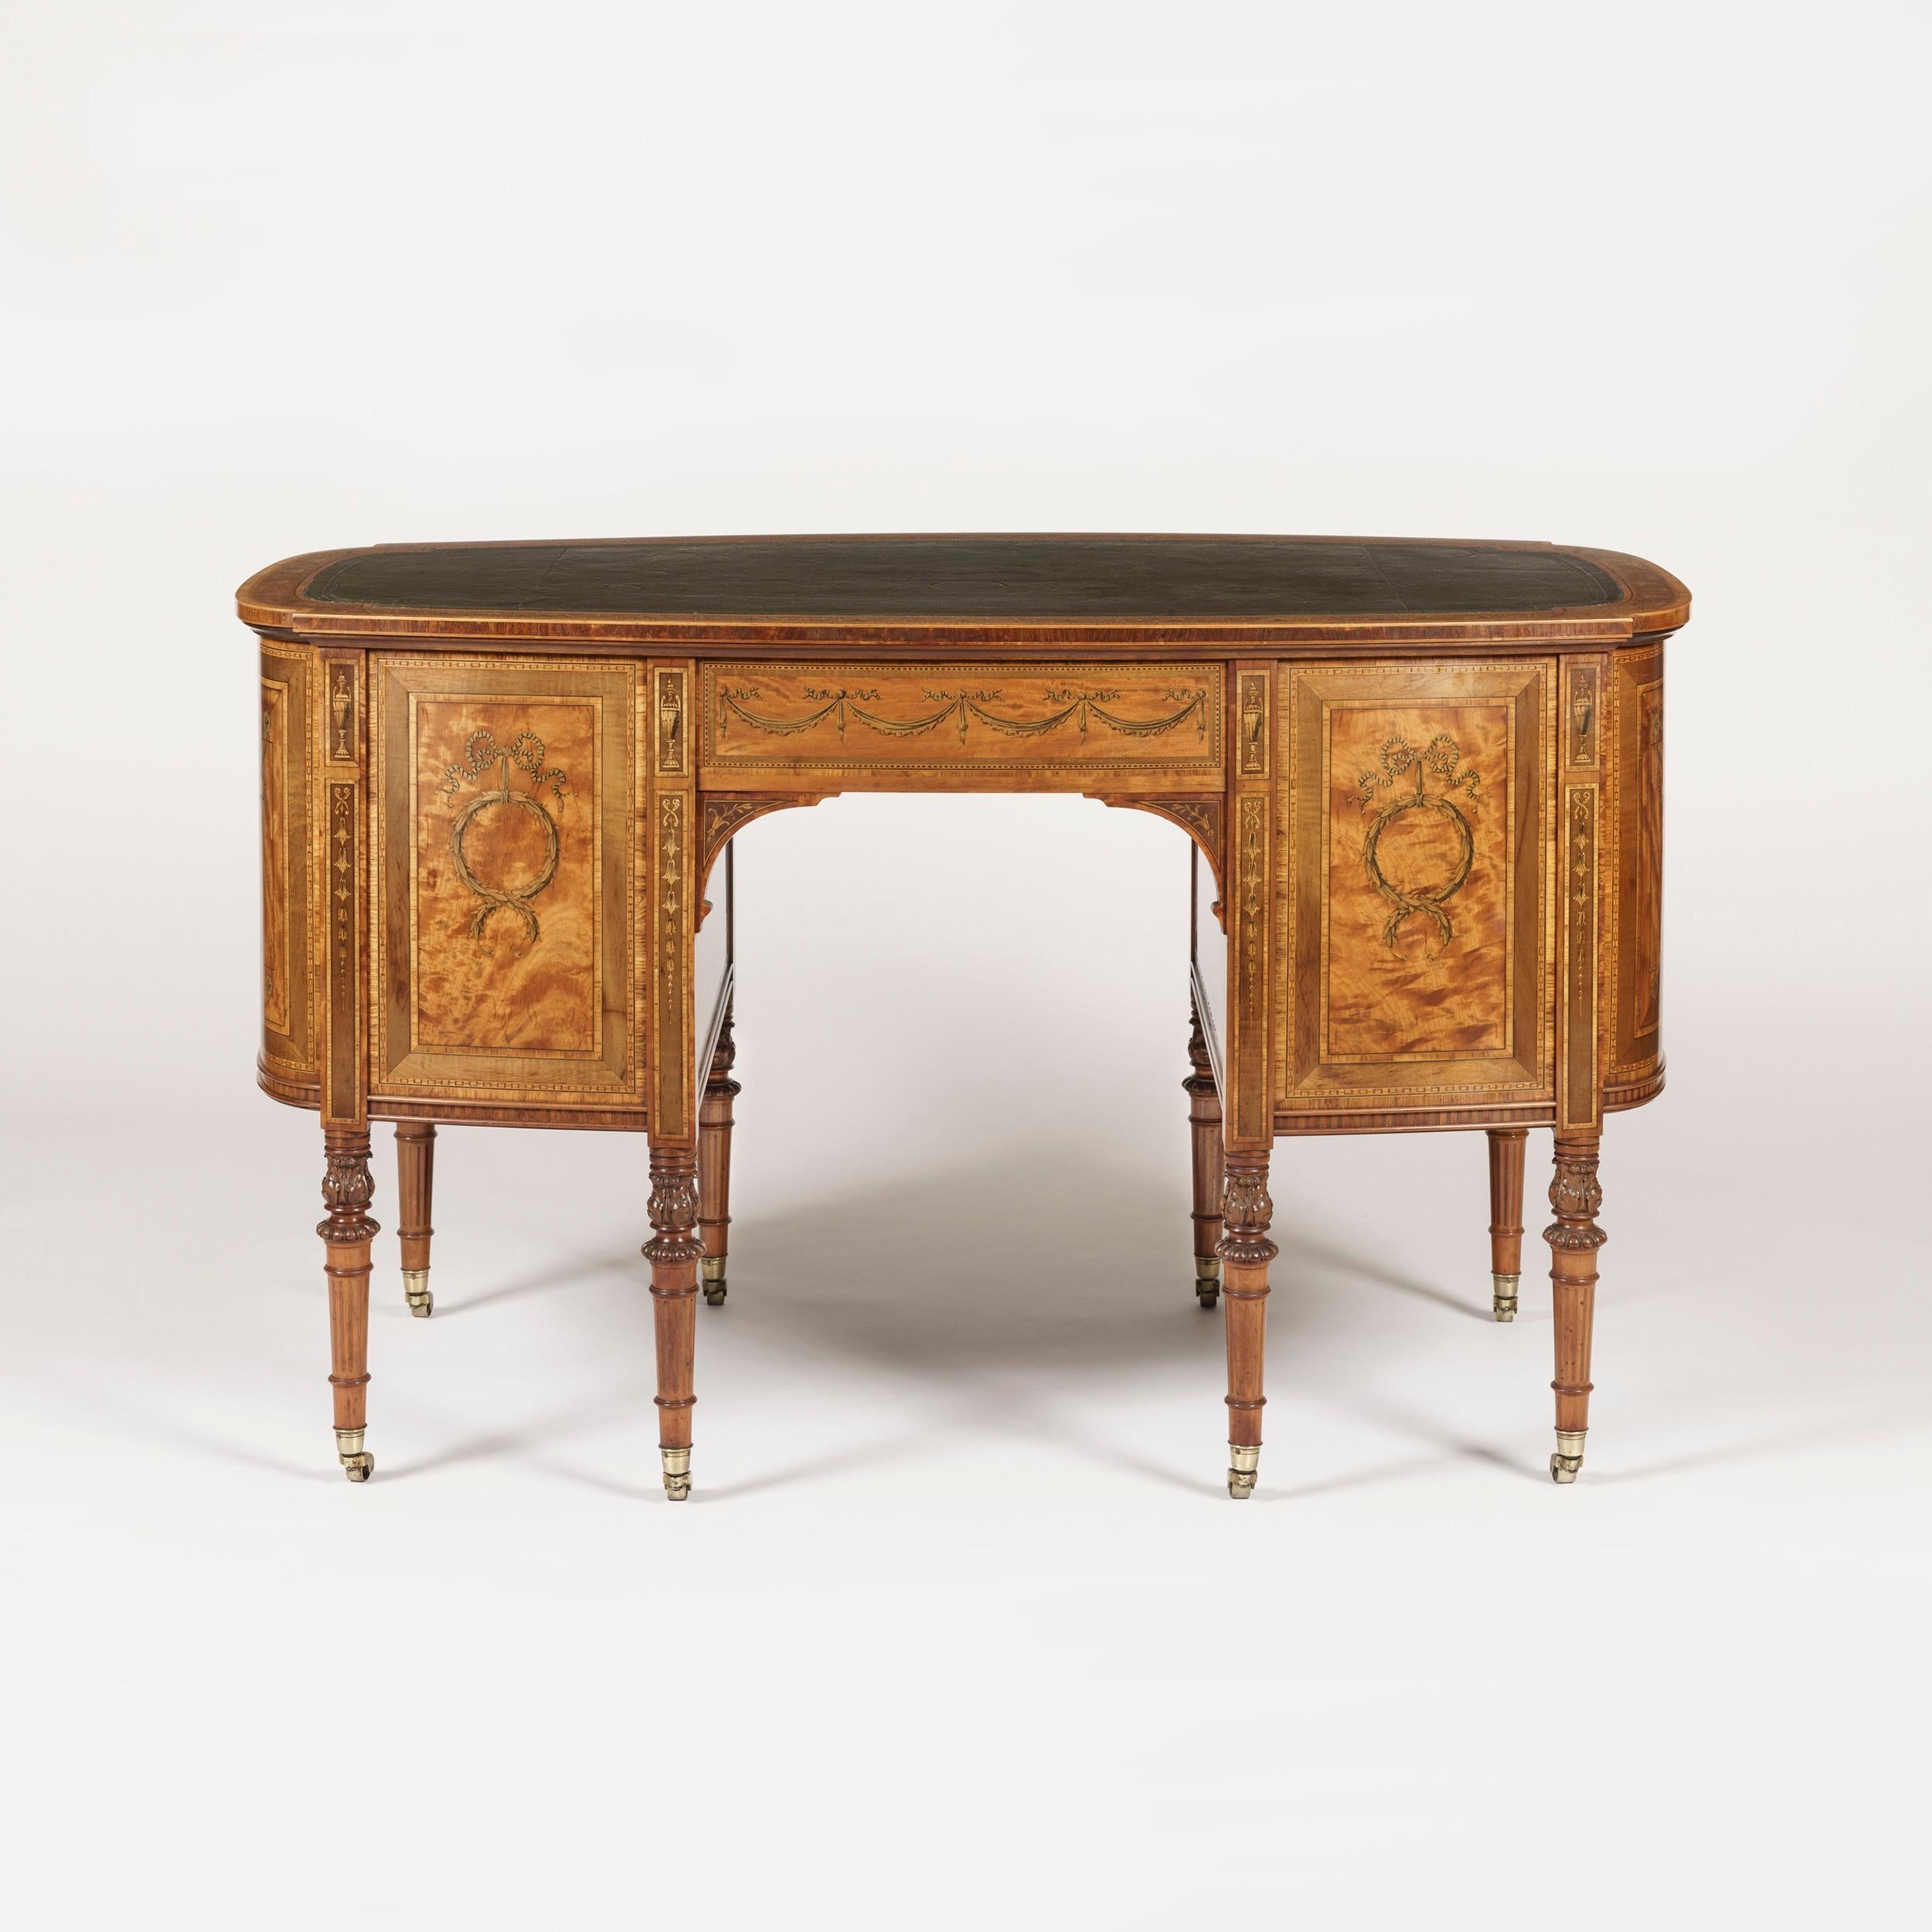 A library table in the adam manner almost certainly by Maple & Company

Constructed in a mellow patinated satinwood, with fine marquetry pictorial and foliate inlays utilising specimen woods including green stained sycamore; of shaped serpentine